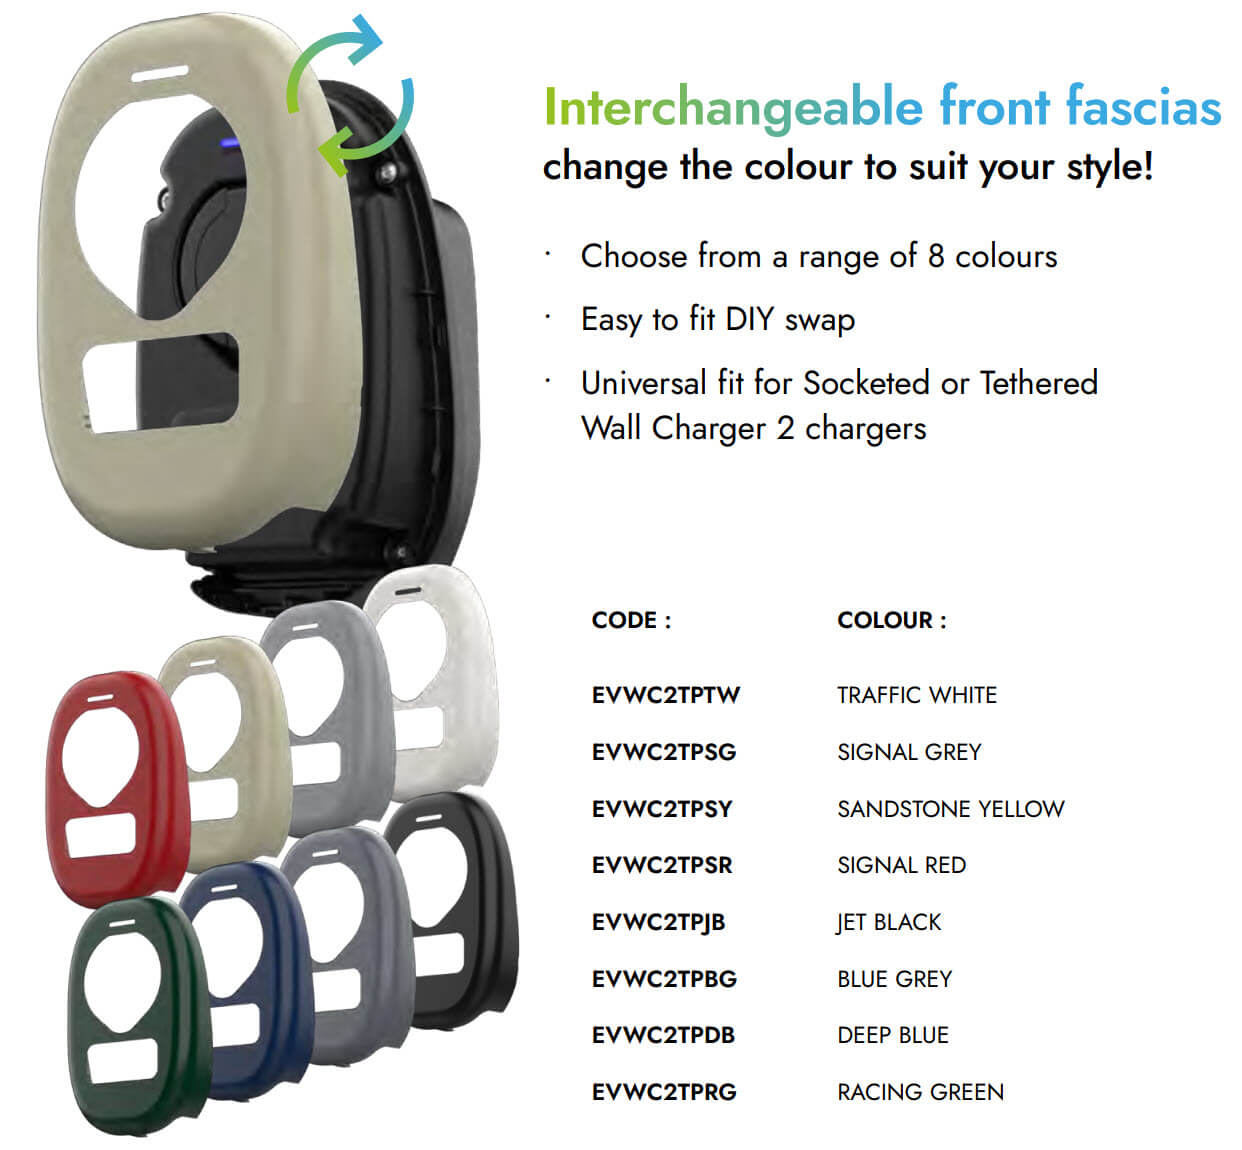 Eight interchangeable front fascias on this BG Sync EV give you colour options.